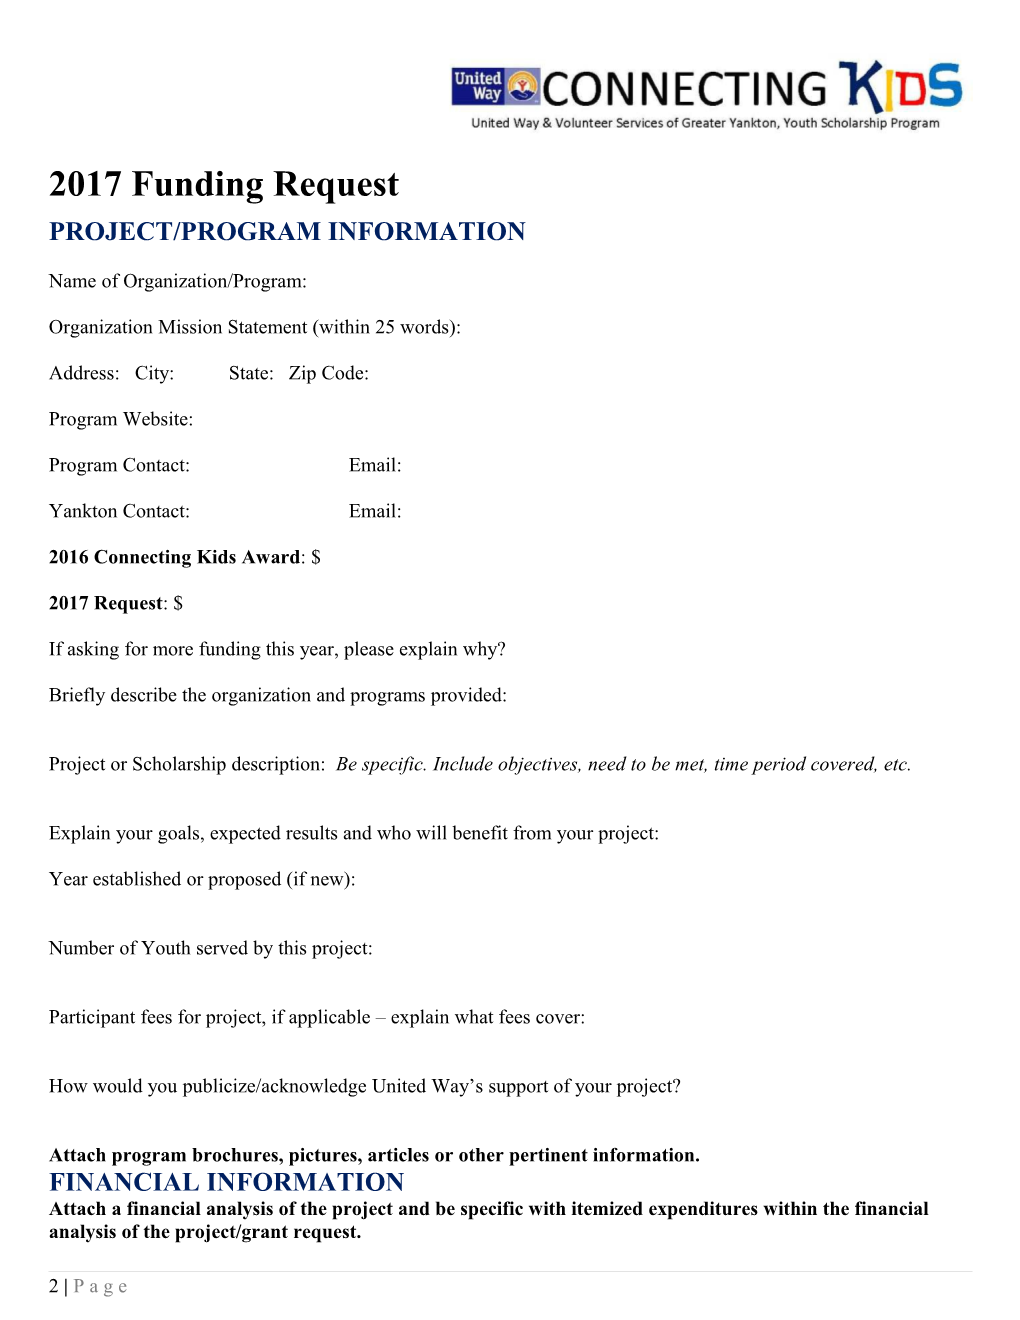 2017 Funding Request